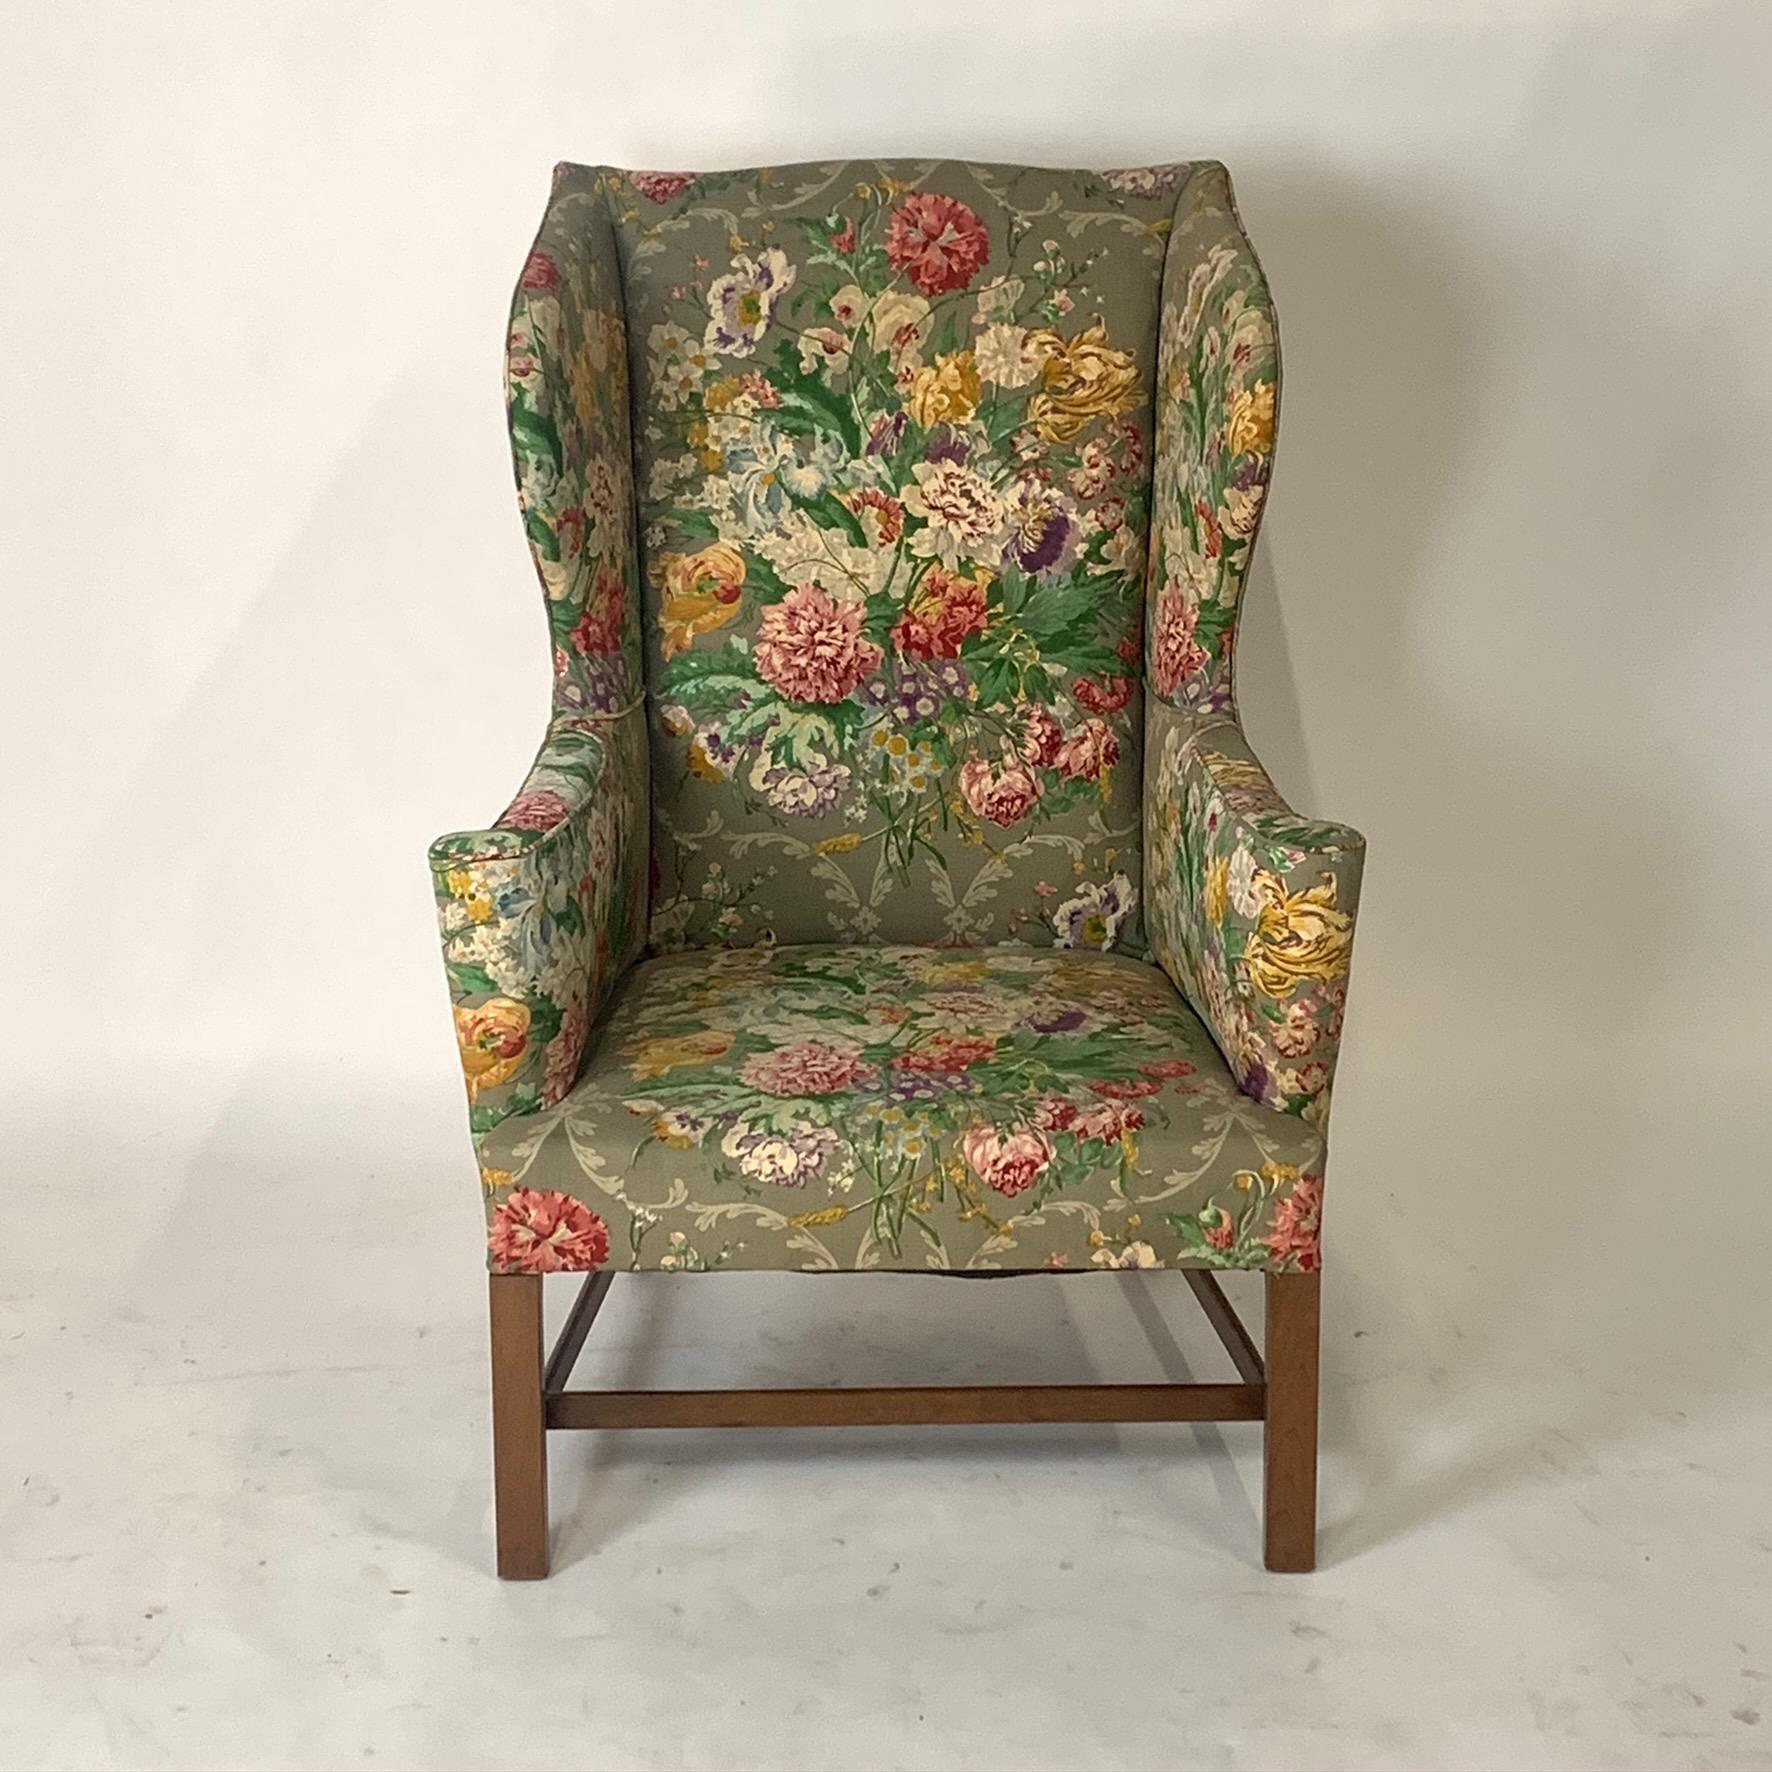 20th Century Exceptional Early American Wingback Chairs with Stunning Floral Upholstery